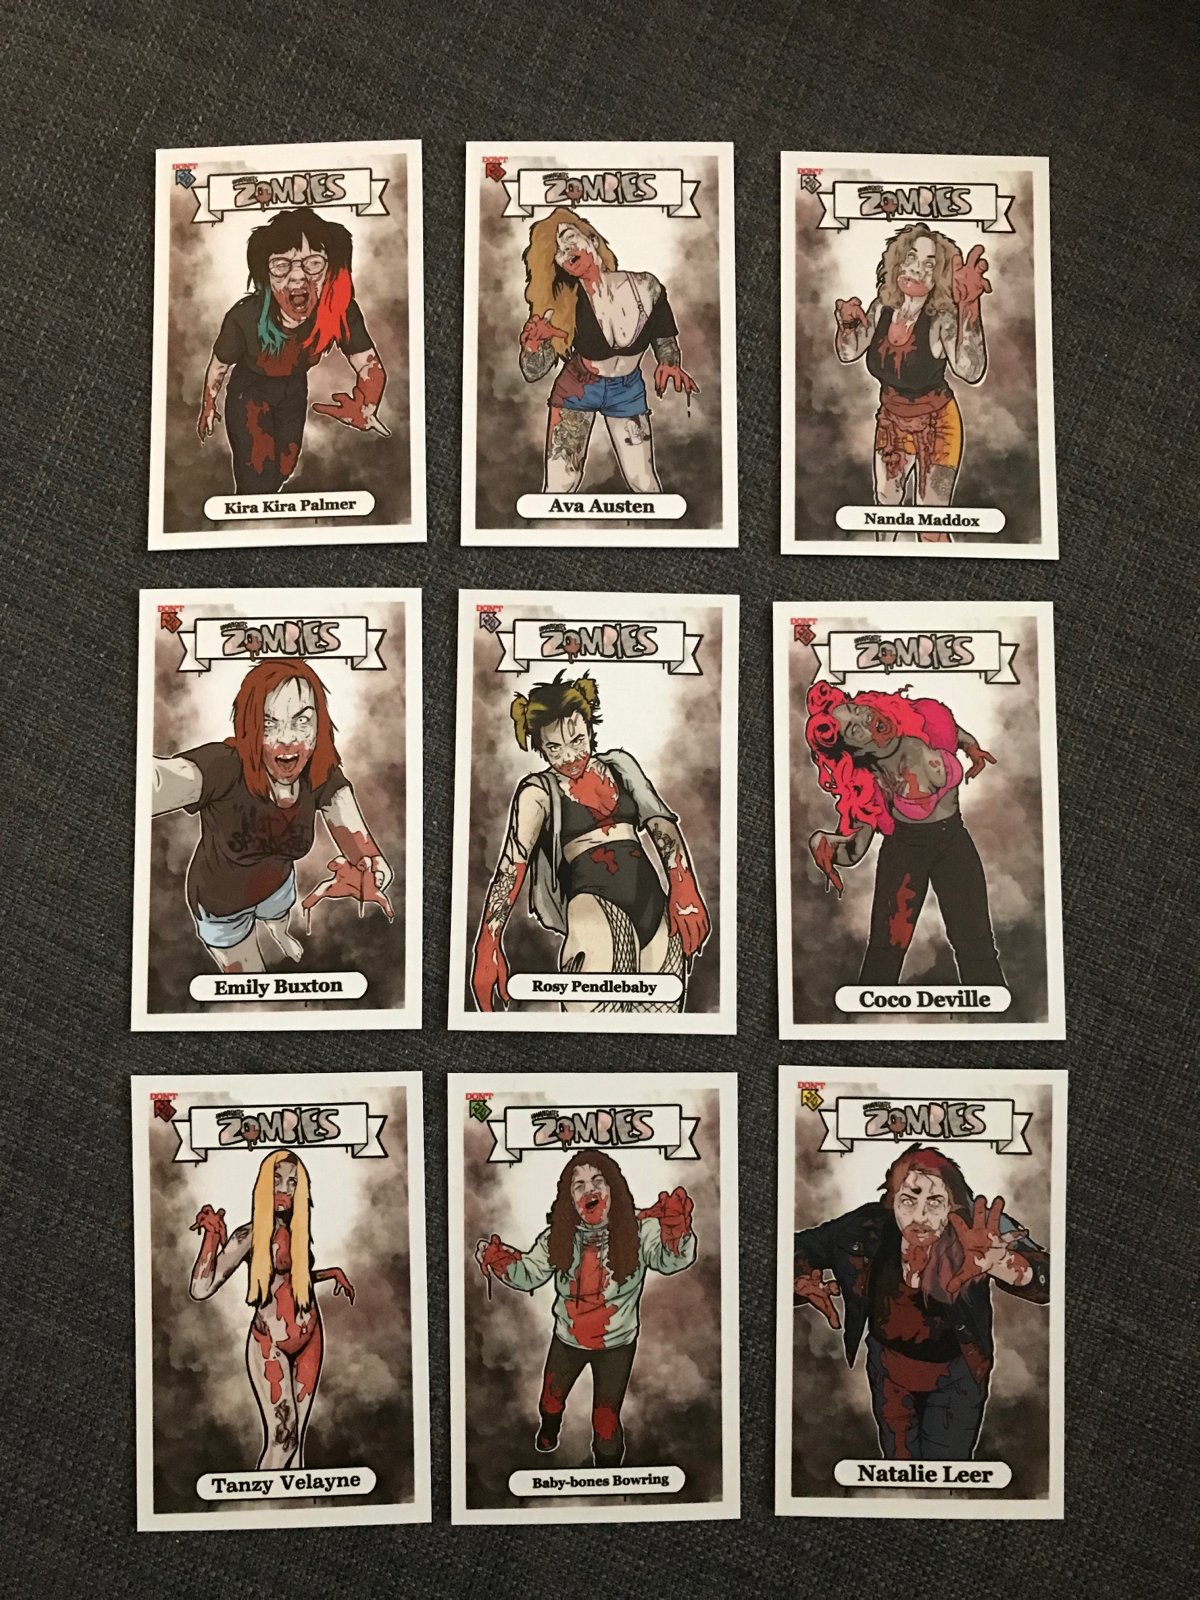 Image of Hmmmbates zombie cards series 1